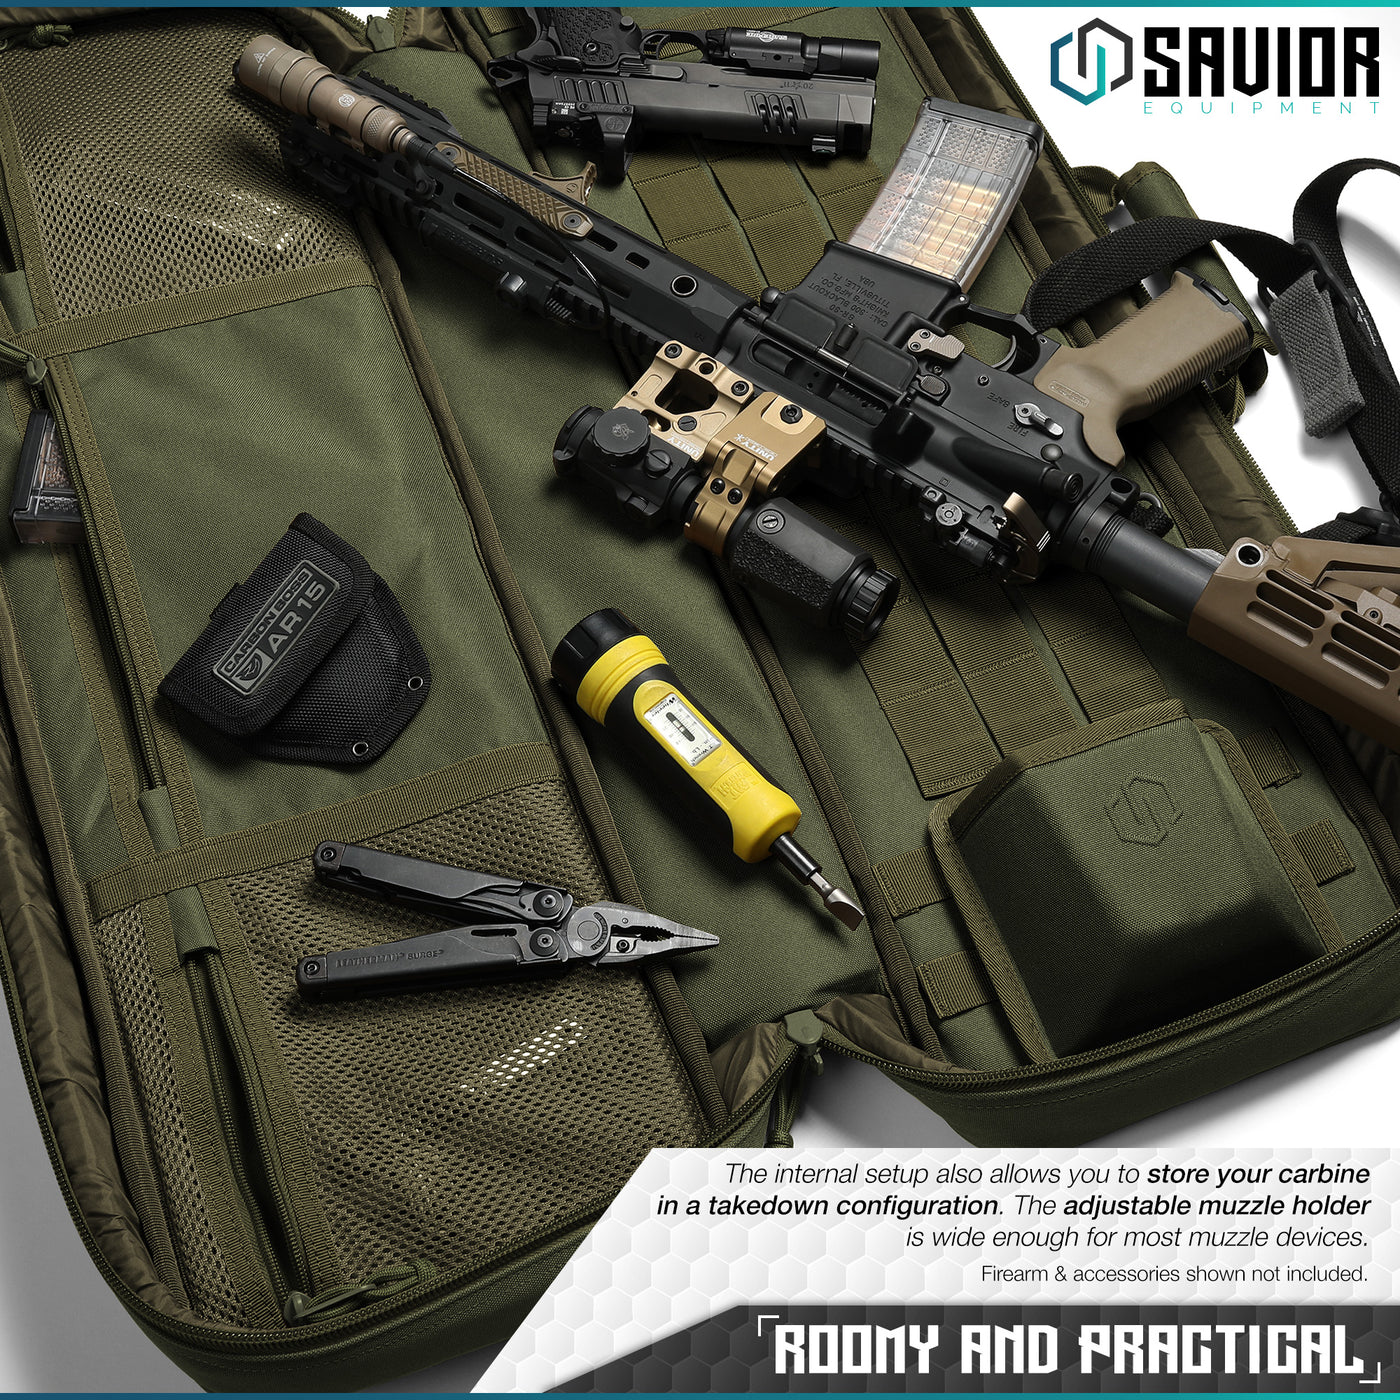 Roomy and Practical - The internal setup also allows you to store your carbine in a takedown configuration. The adjustable muzzle holder is wide enough for most muzzle devices. Firearm & accessories shown not included.